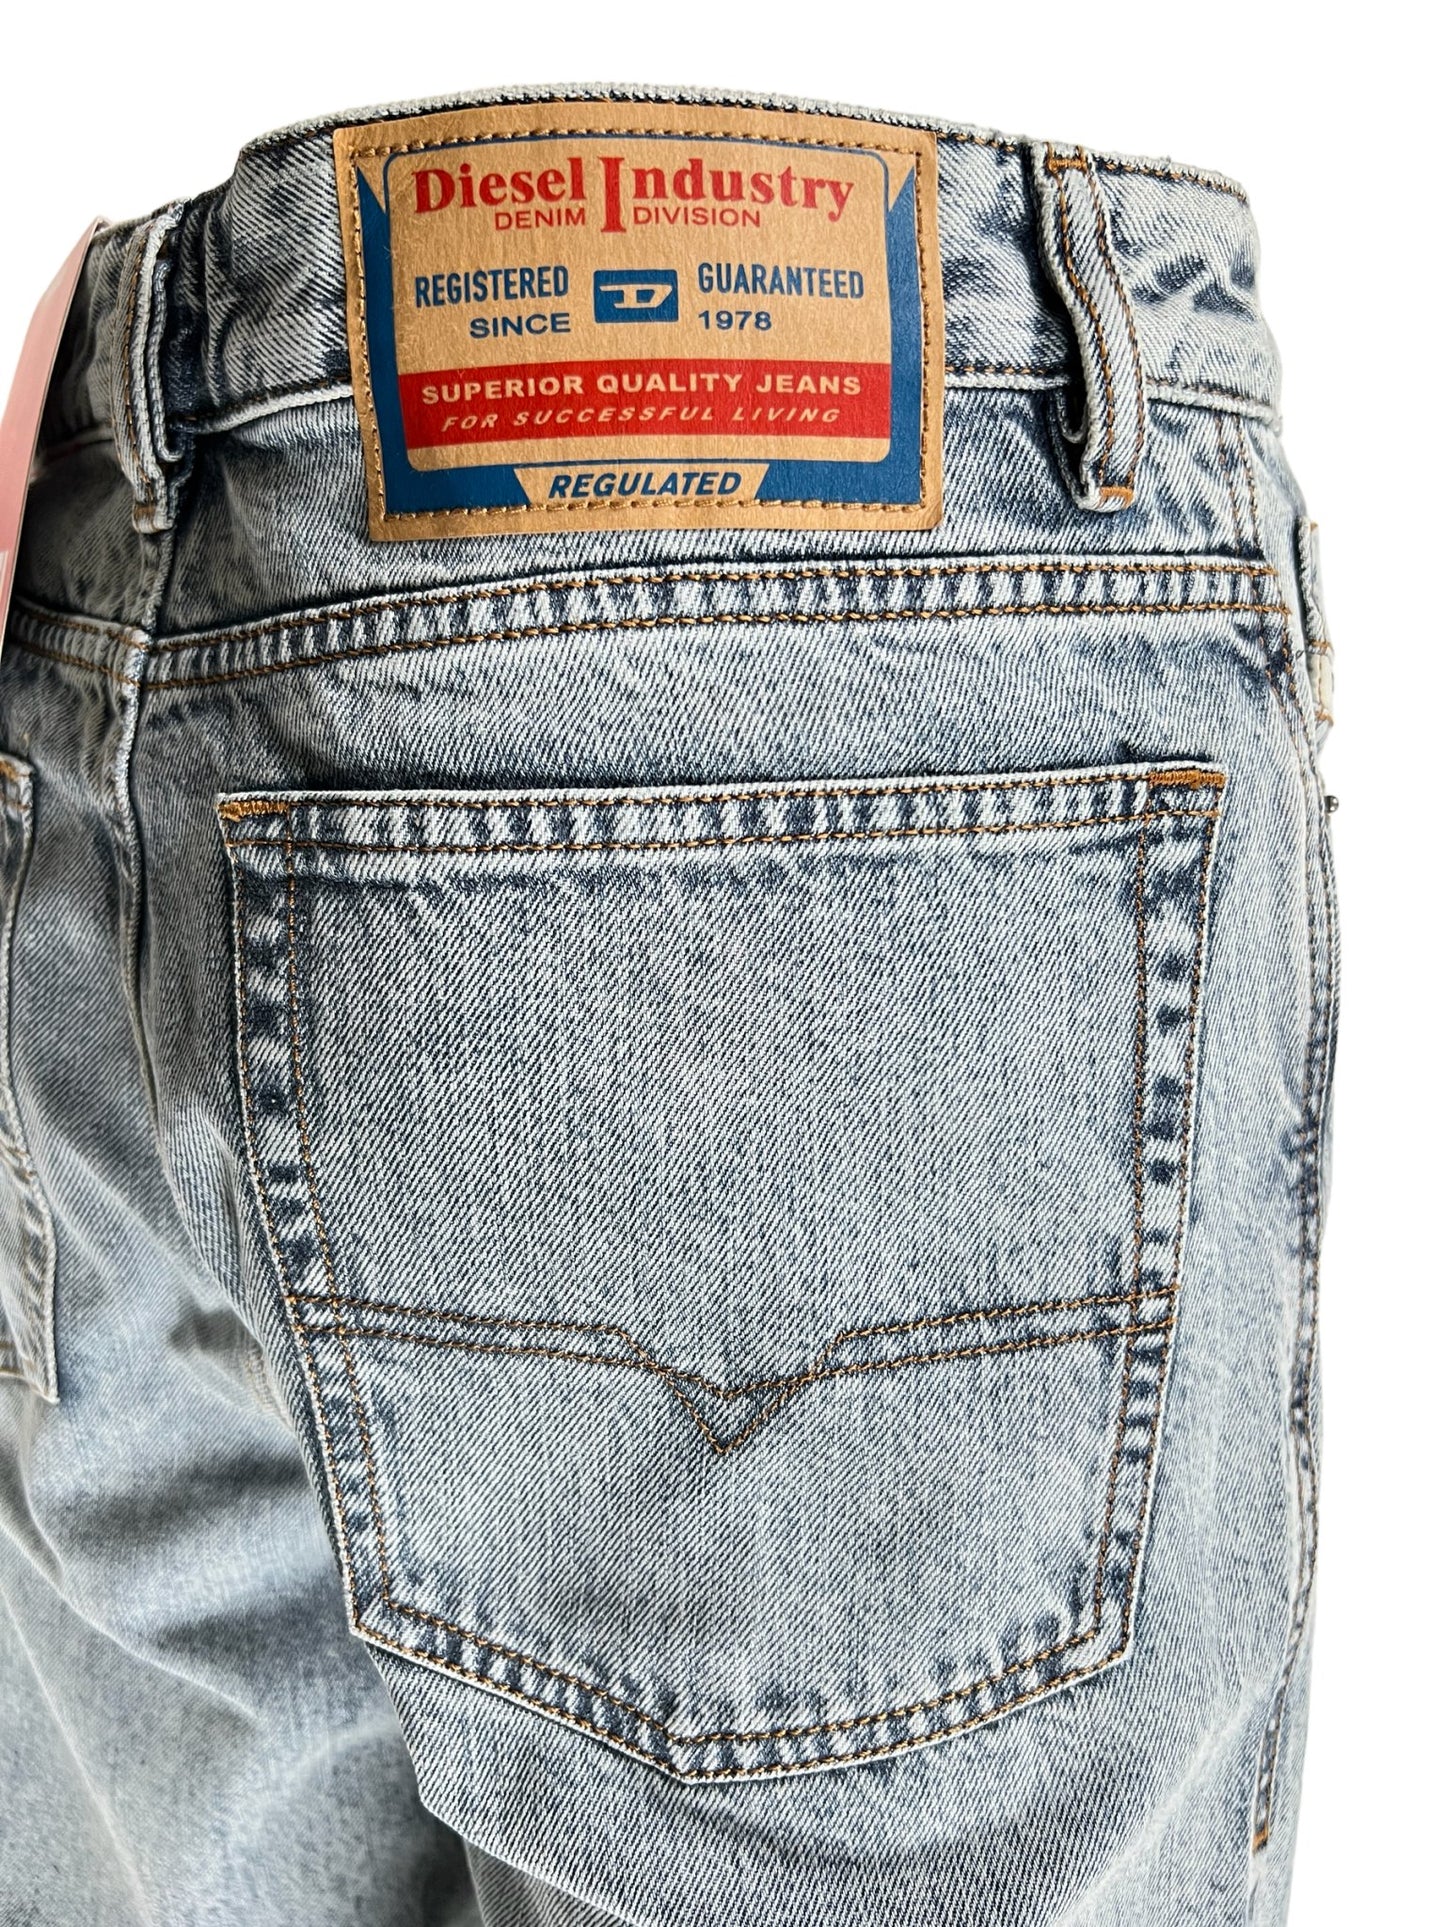 Blue light wash denim jeans with a label showing the brand DIESEL and product information on the waistband.